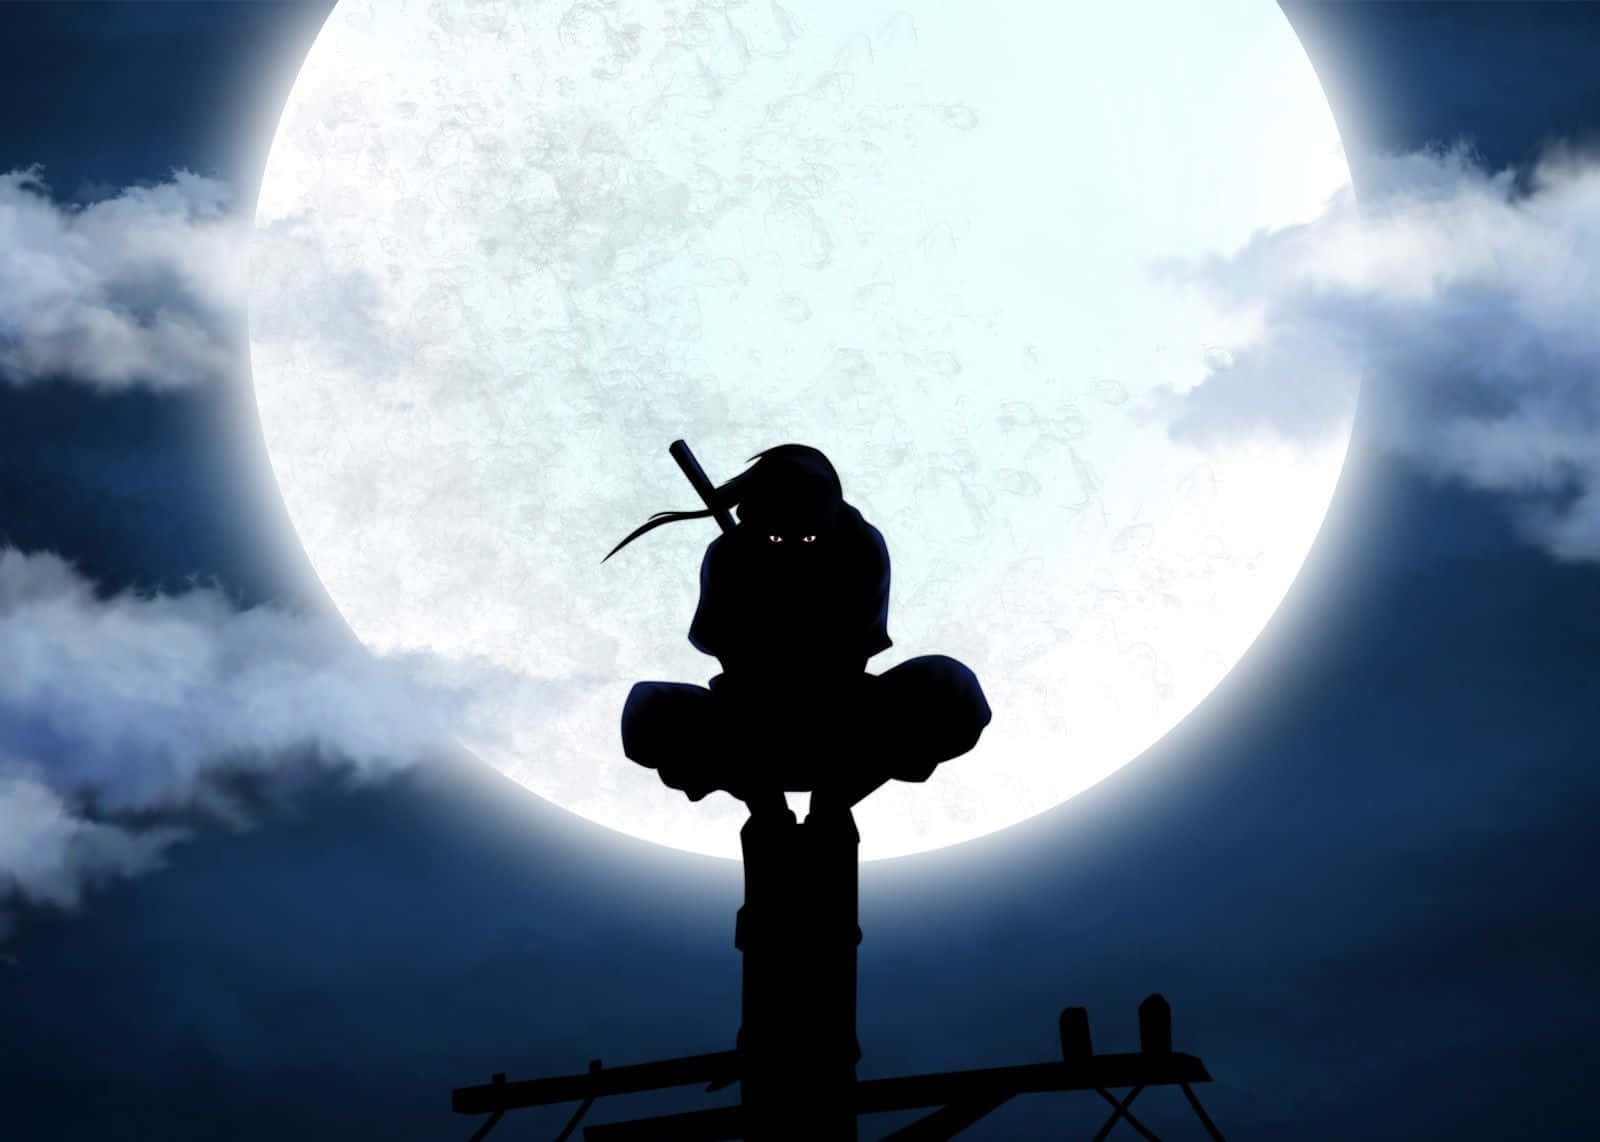 A powerful and mysterious figure, Uchiha Itachi stands in the moonlight.